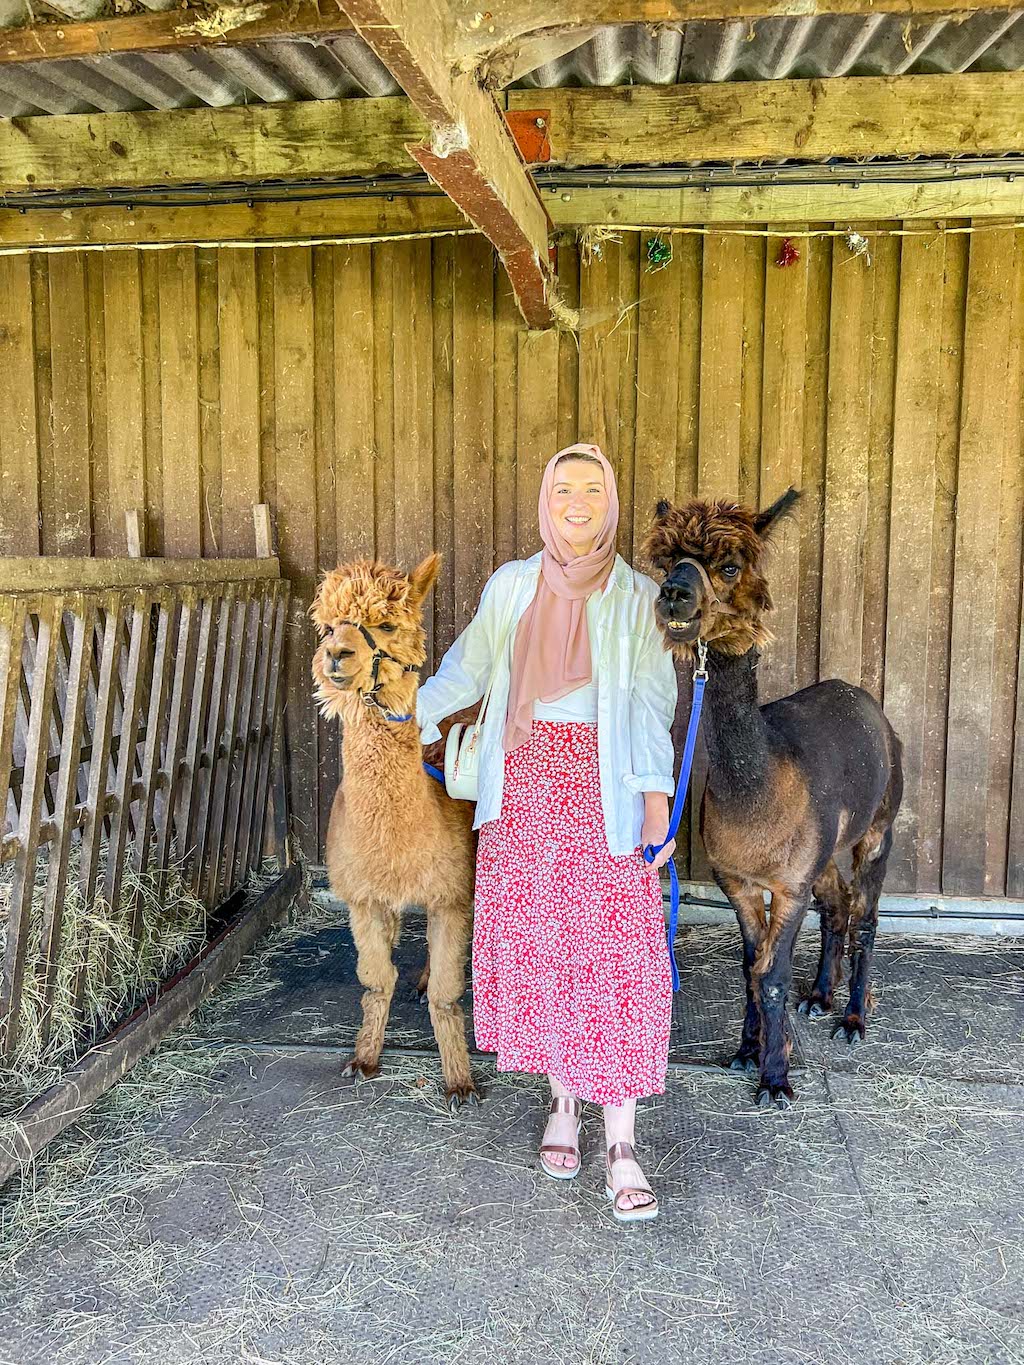 Ellie with Alpacas at White Peak Alpaca Farm, Family Days Out in Manchester, Manchester with kids, 